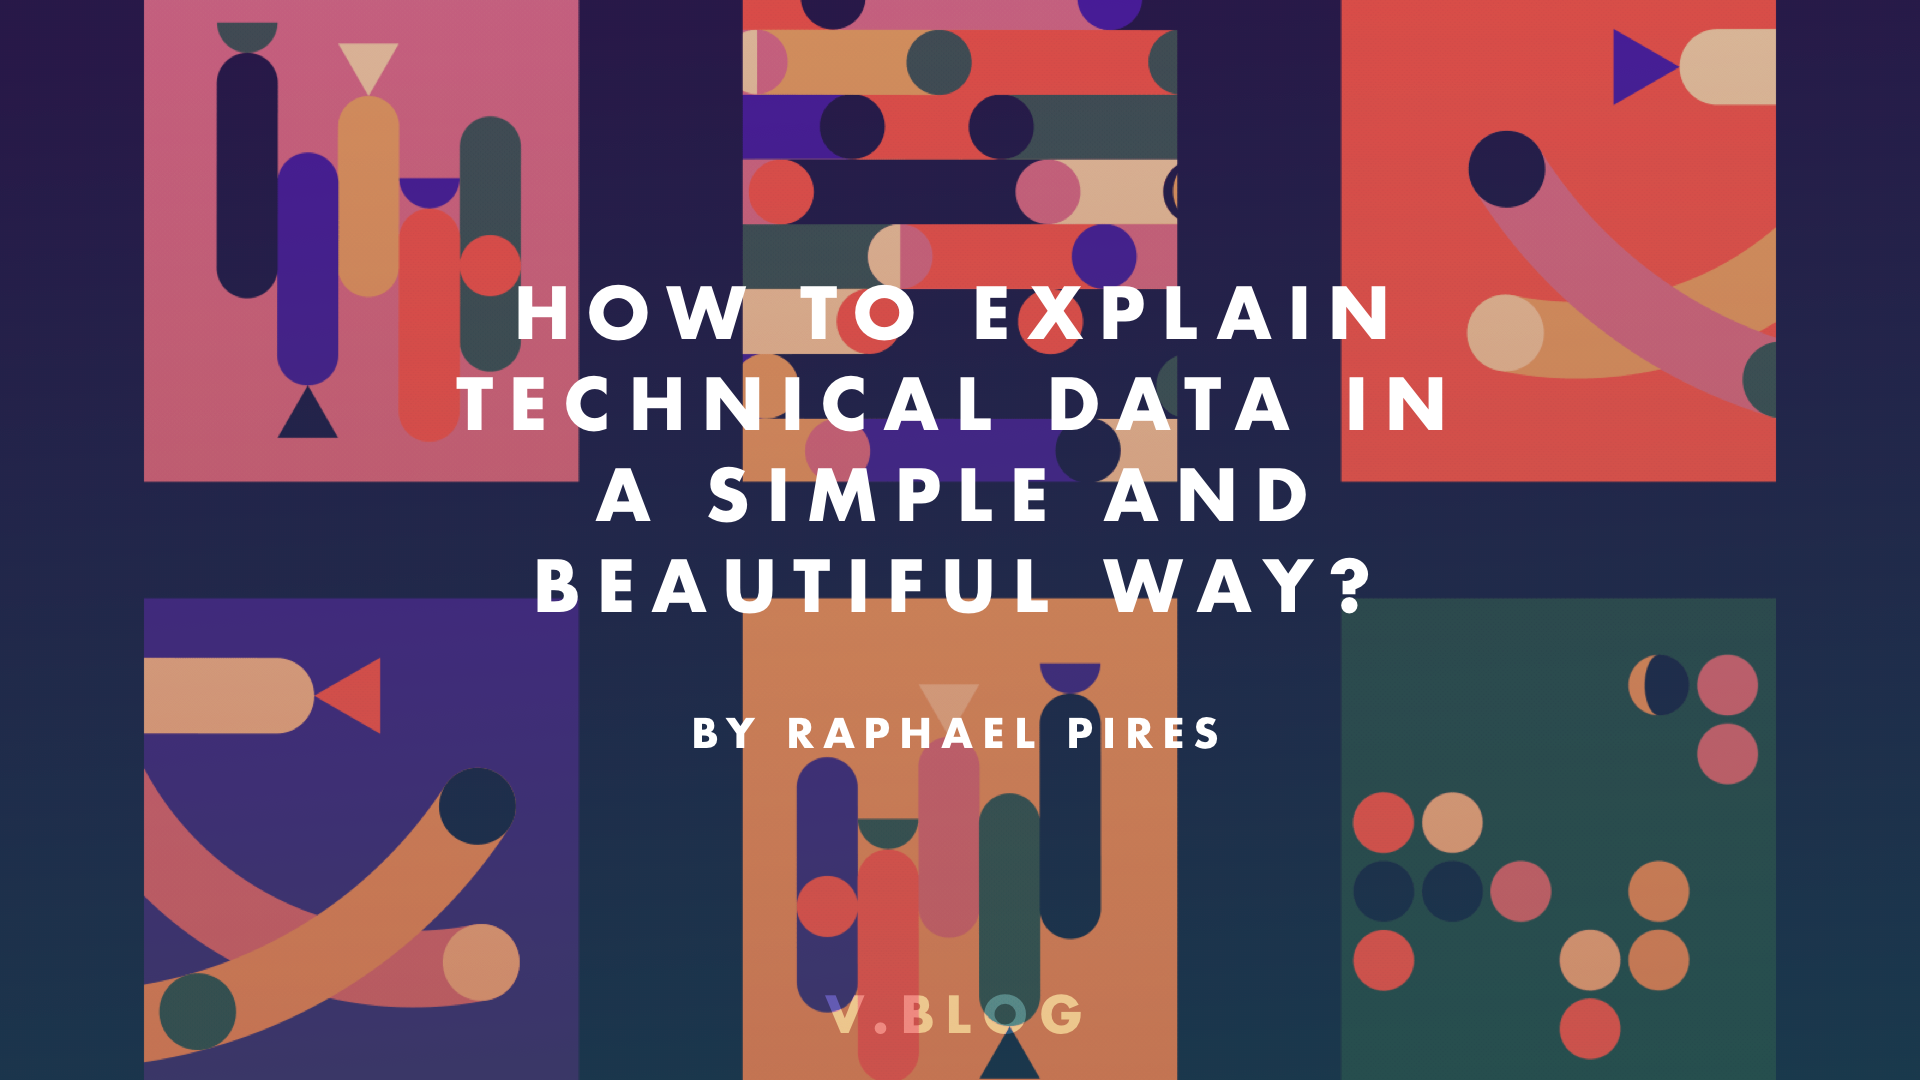 How To Explain Technical Data In A Simple & Beautiful Way